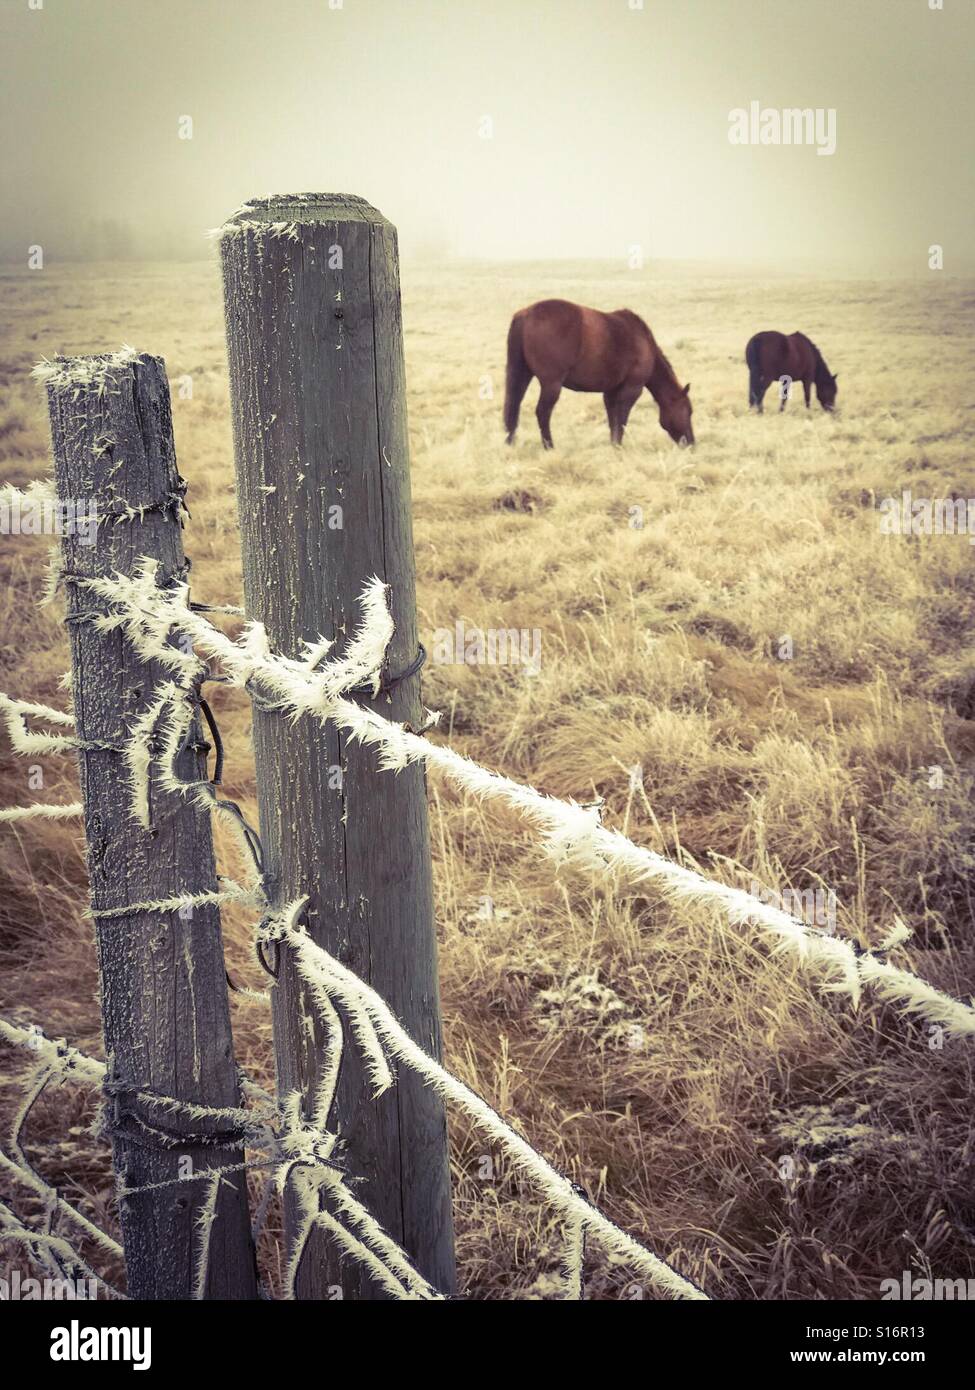 Horses graze in a foggy pasture surrounded by a hoar frost-coated barbed wire fence. Stock Photo